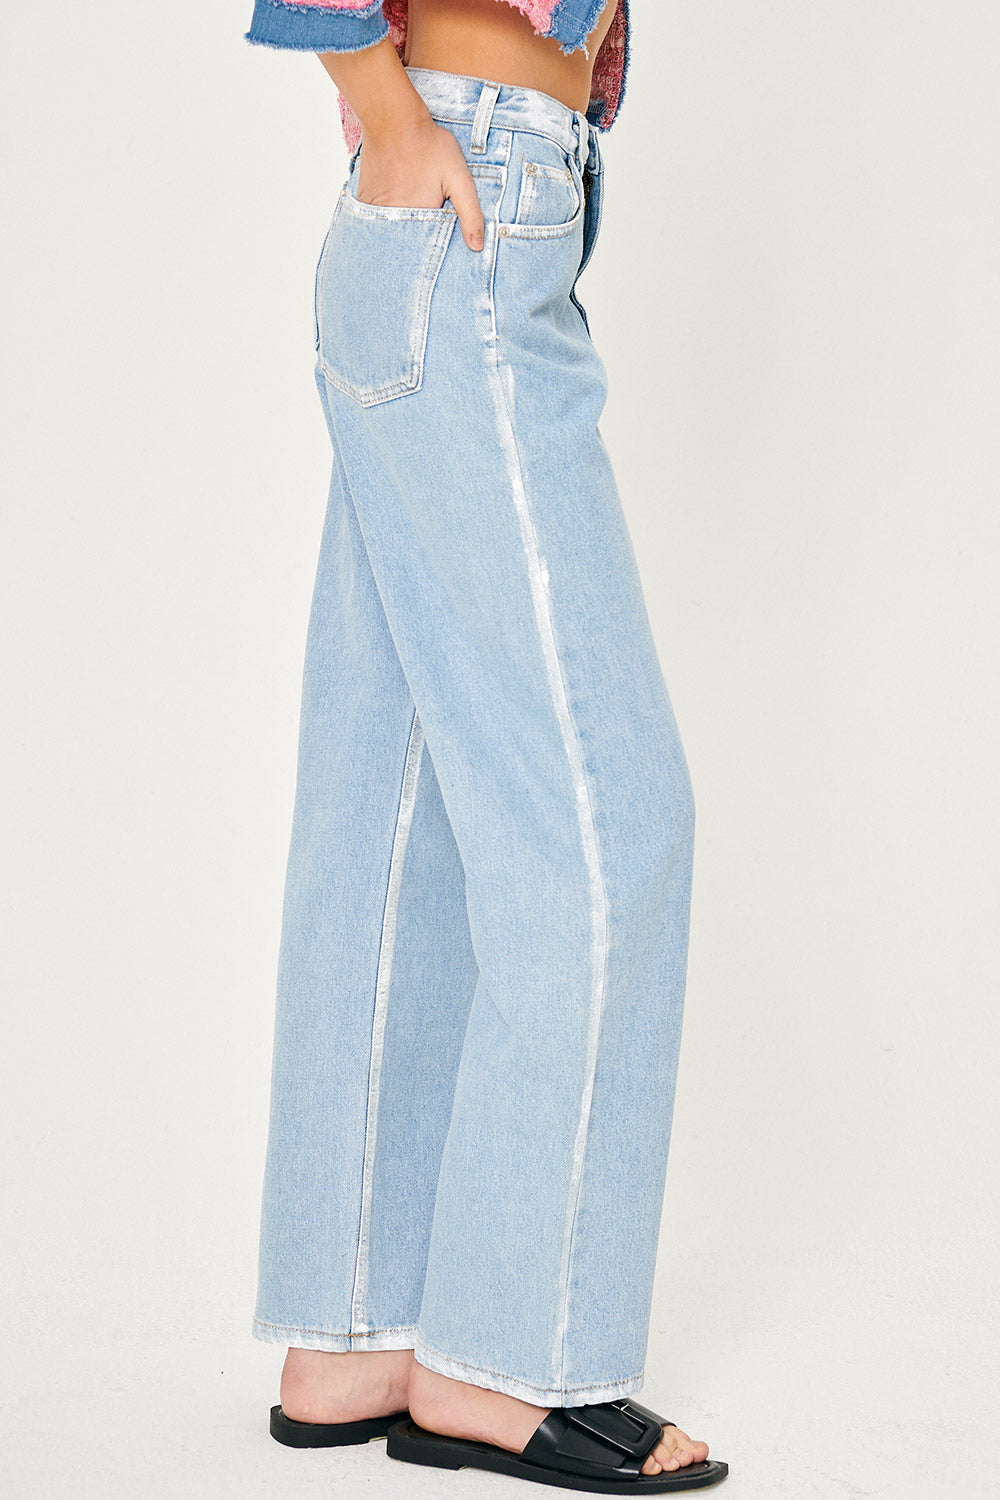 storets.com Reagan Painted Relaxed Fit Jeans